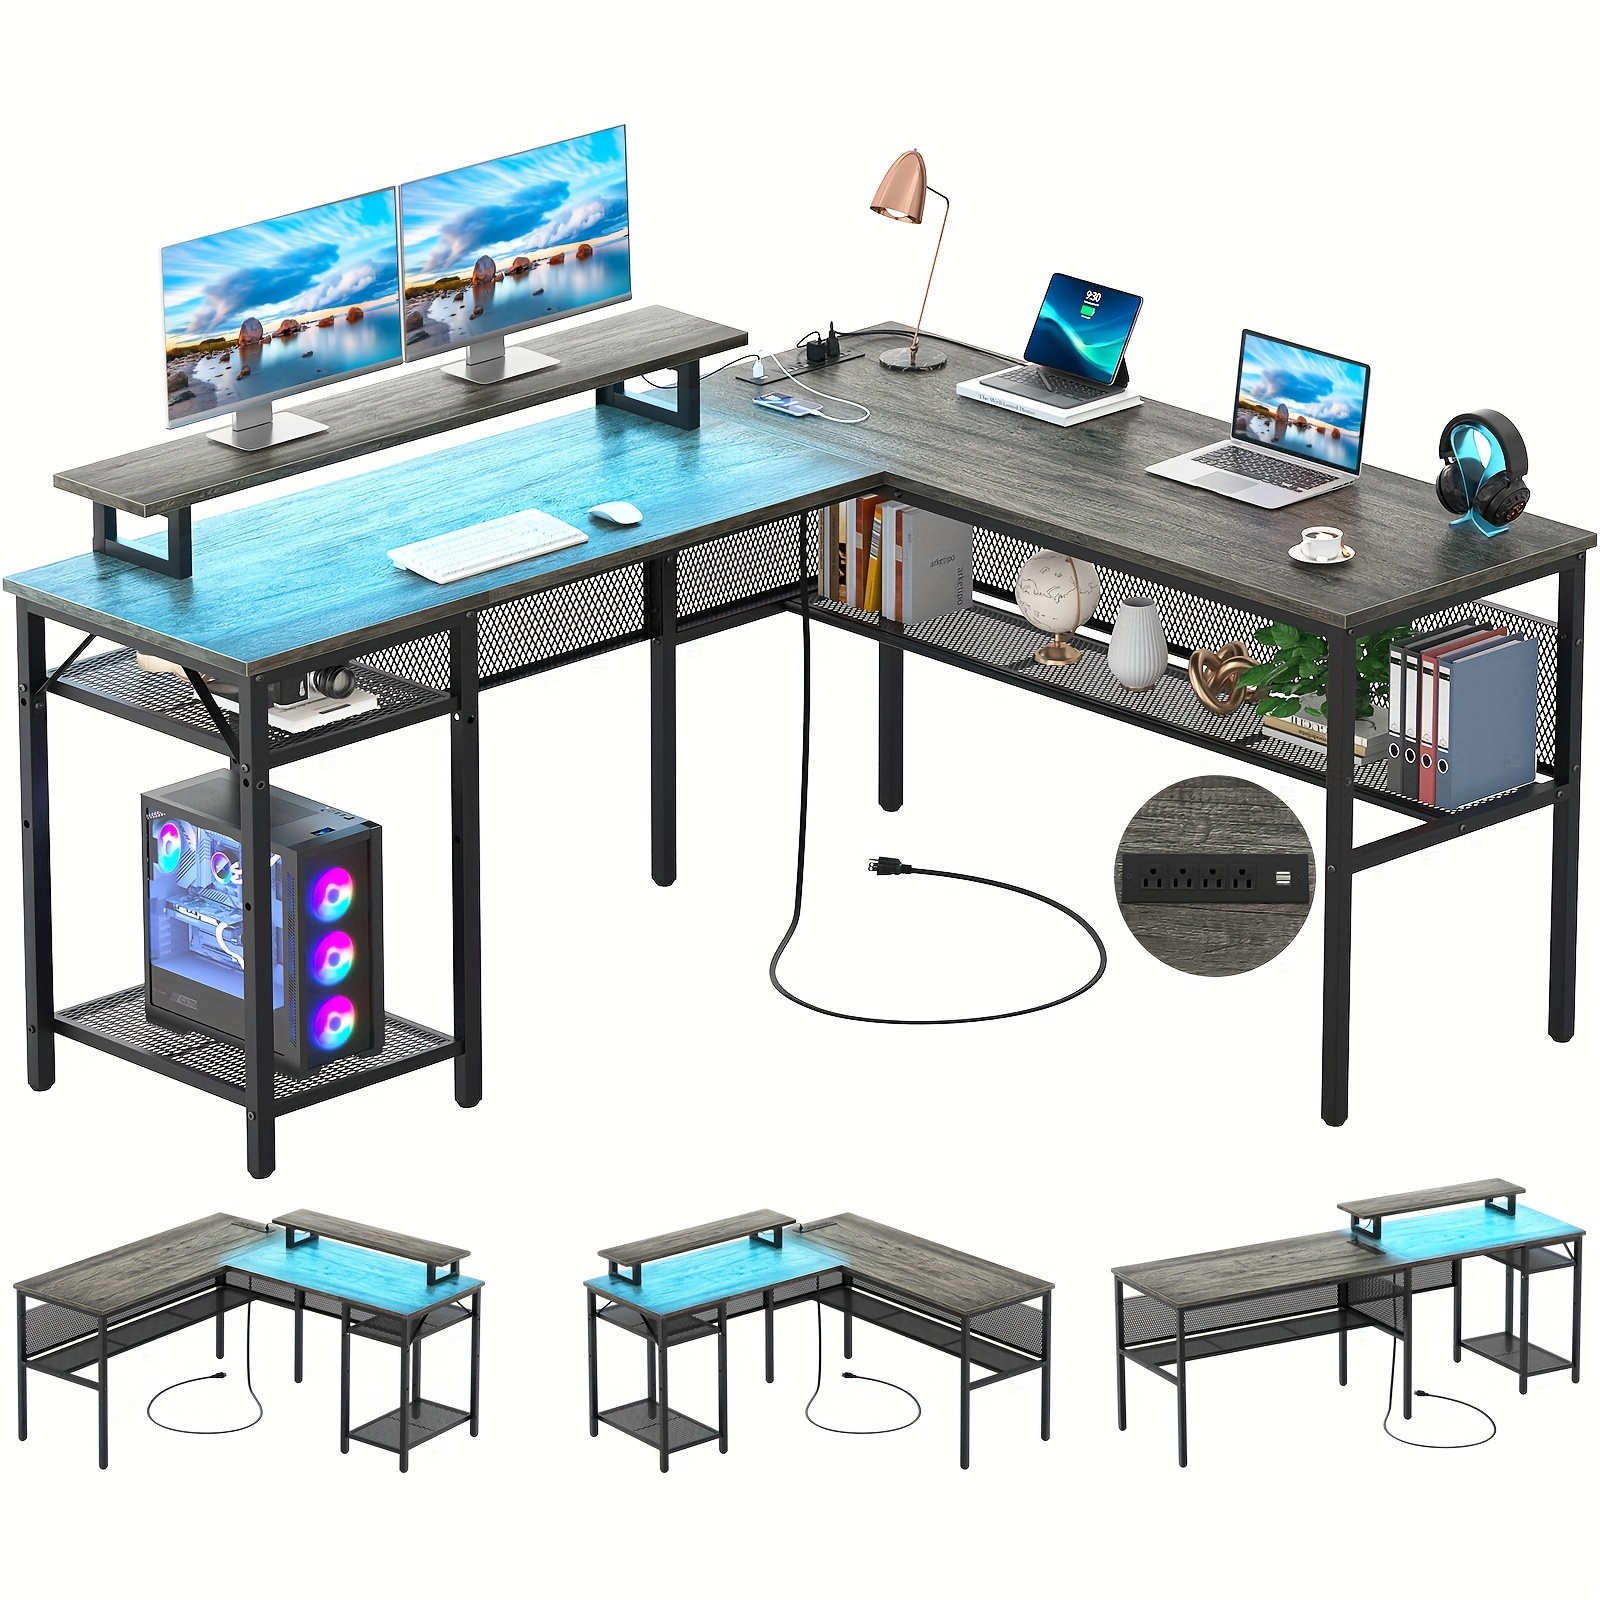 

Unikito L Shaped Computer Desk, Reversible 55 Inch Desk With Monitor Stand, Unique Grid Design, Gaming Table With Storage, Black Oak